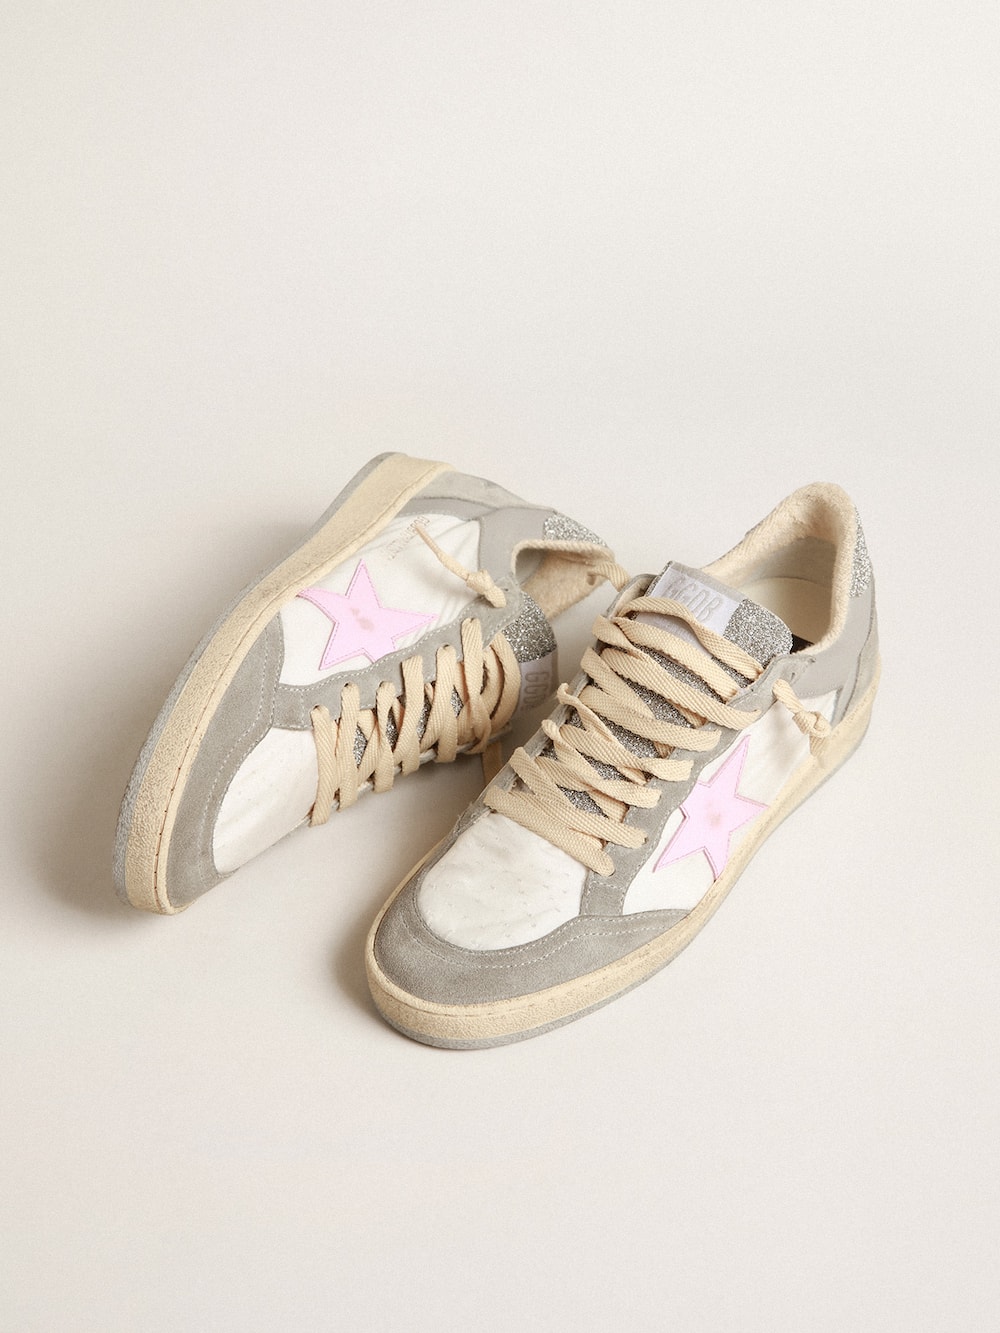 Golden Goose - Ball Star LTD with Swarovski crystal inserts and pink star in 